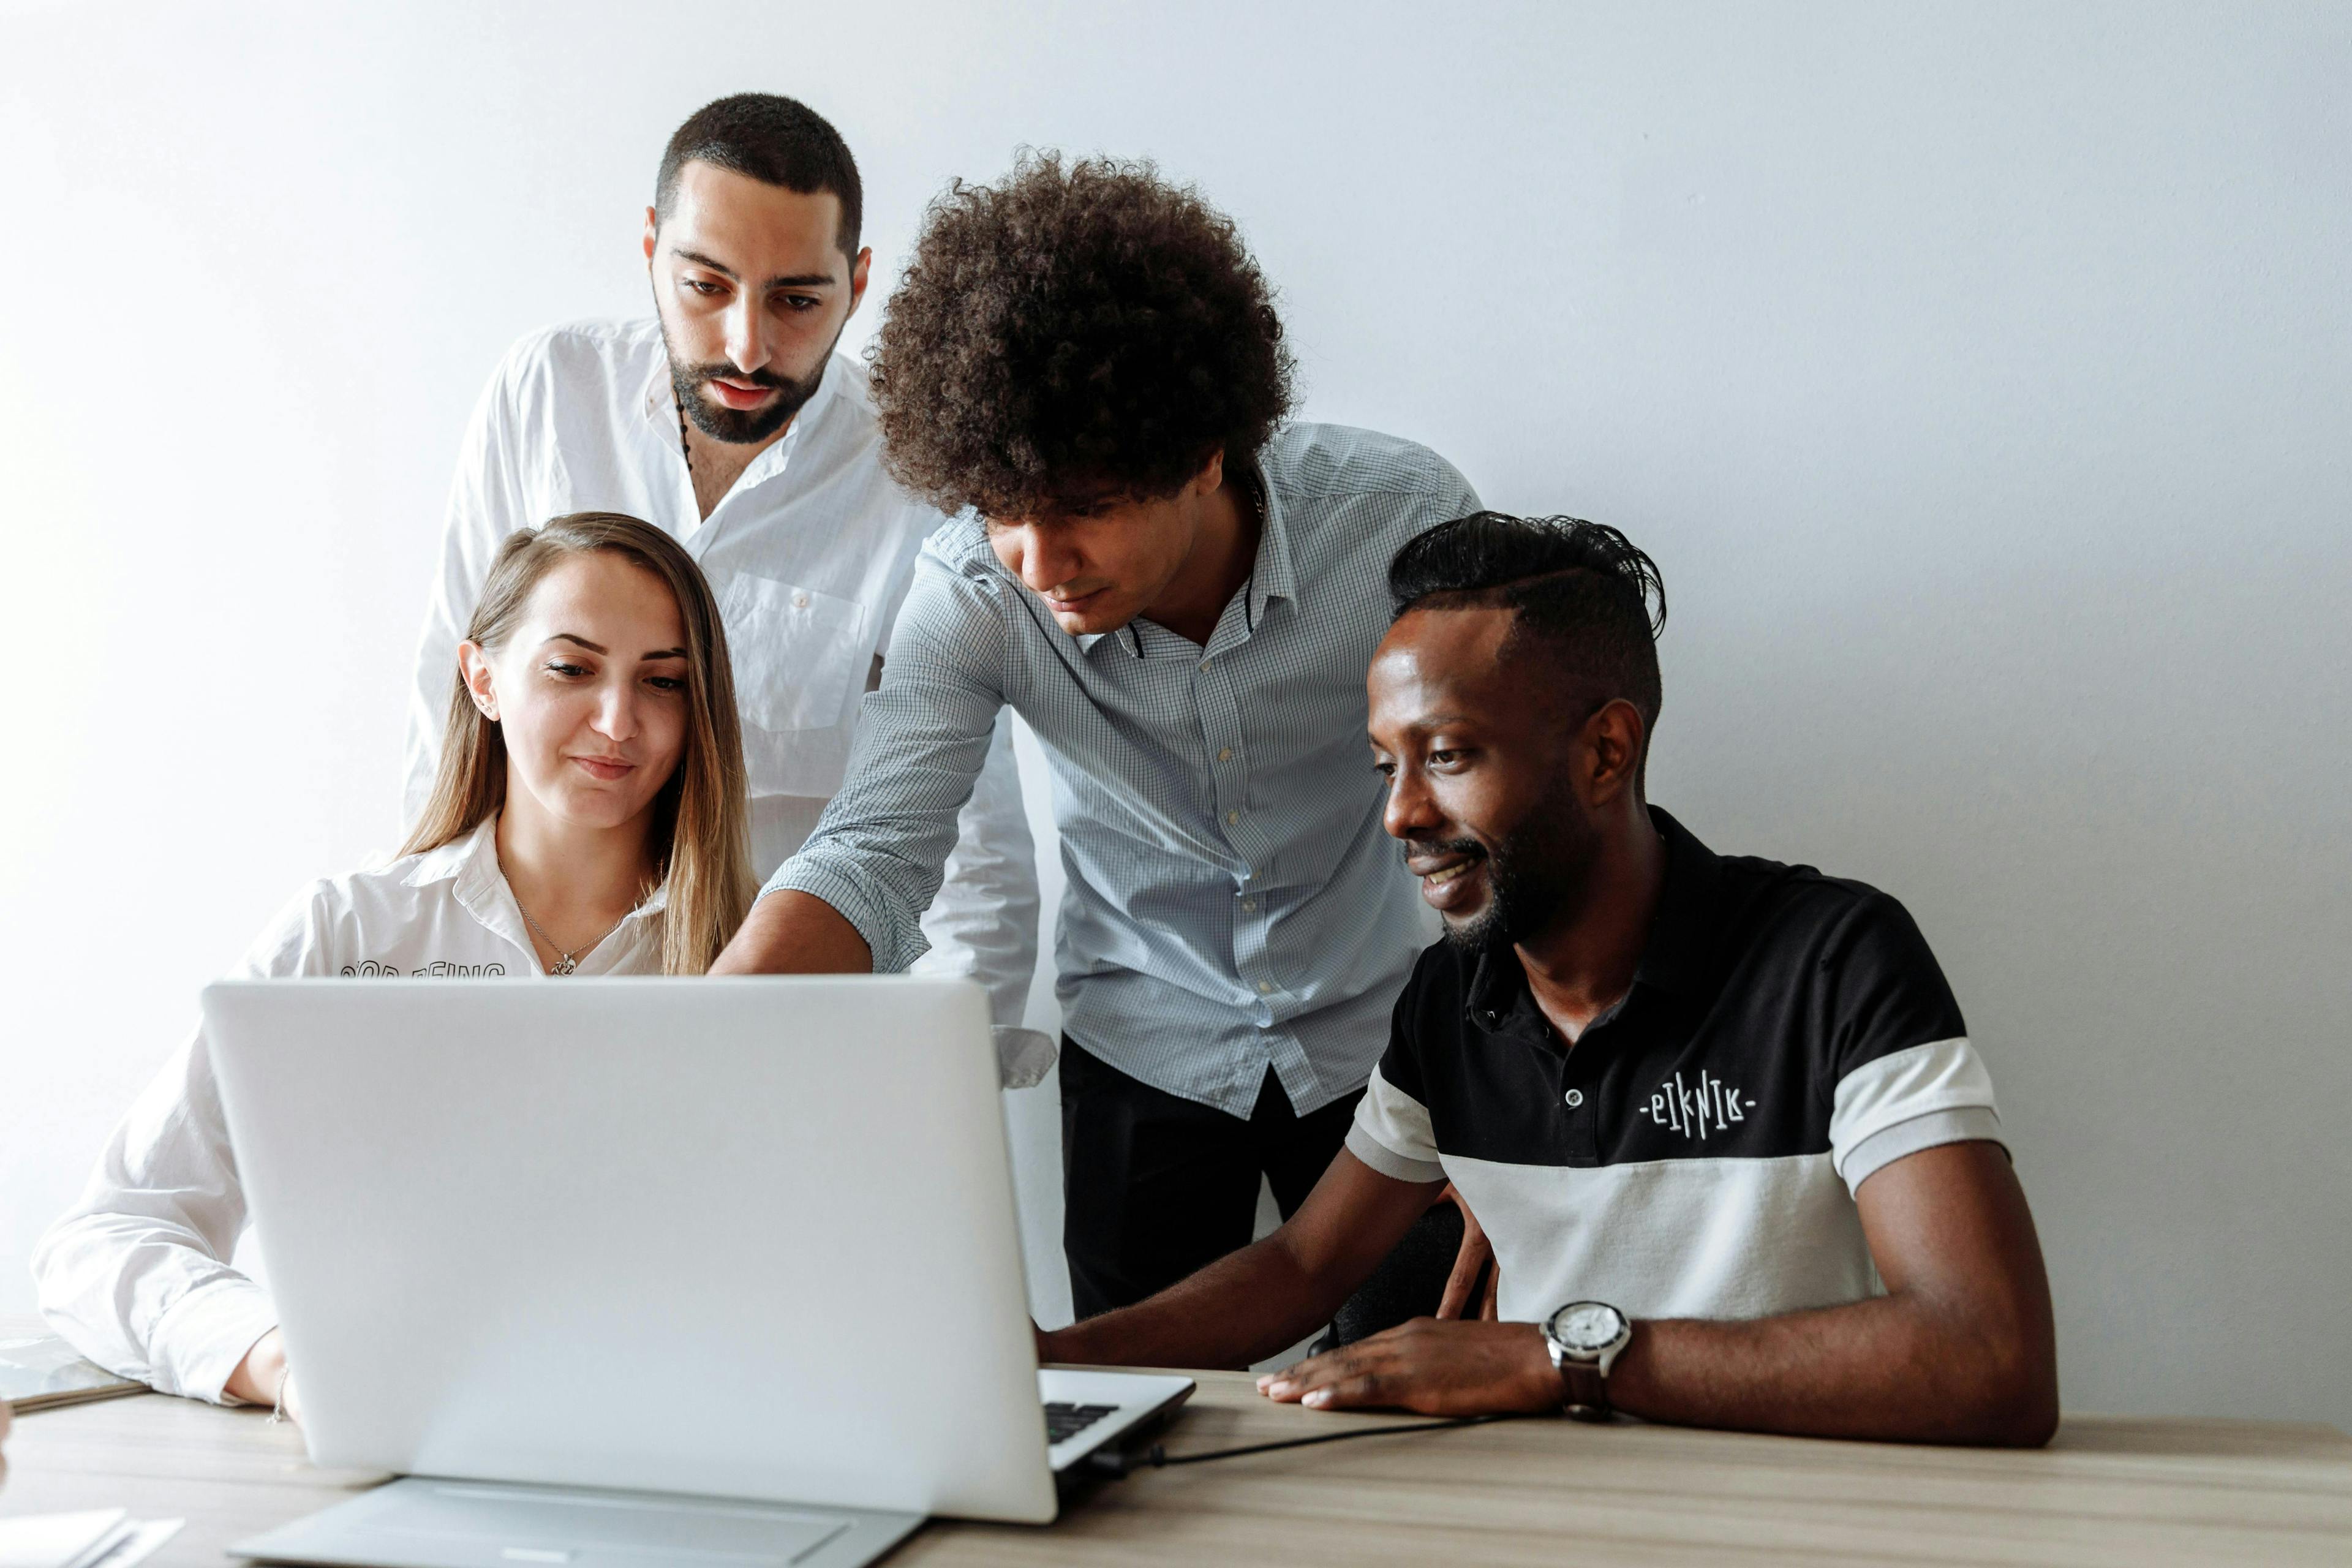 A team collaborating on a project while gathered around a laptop. This image can inspire lead magnet ideas for business teamwork and productivity.